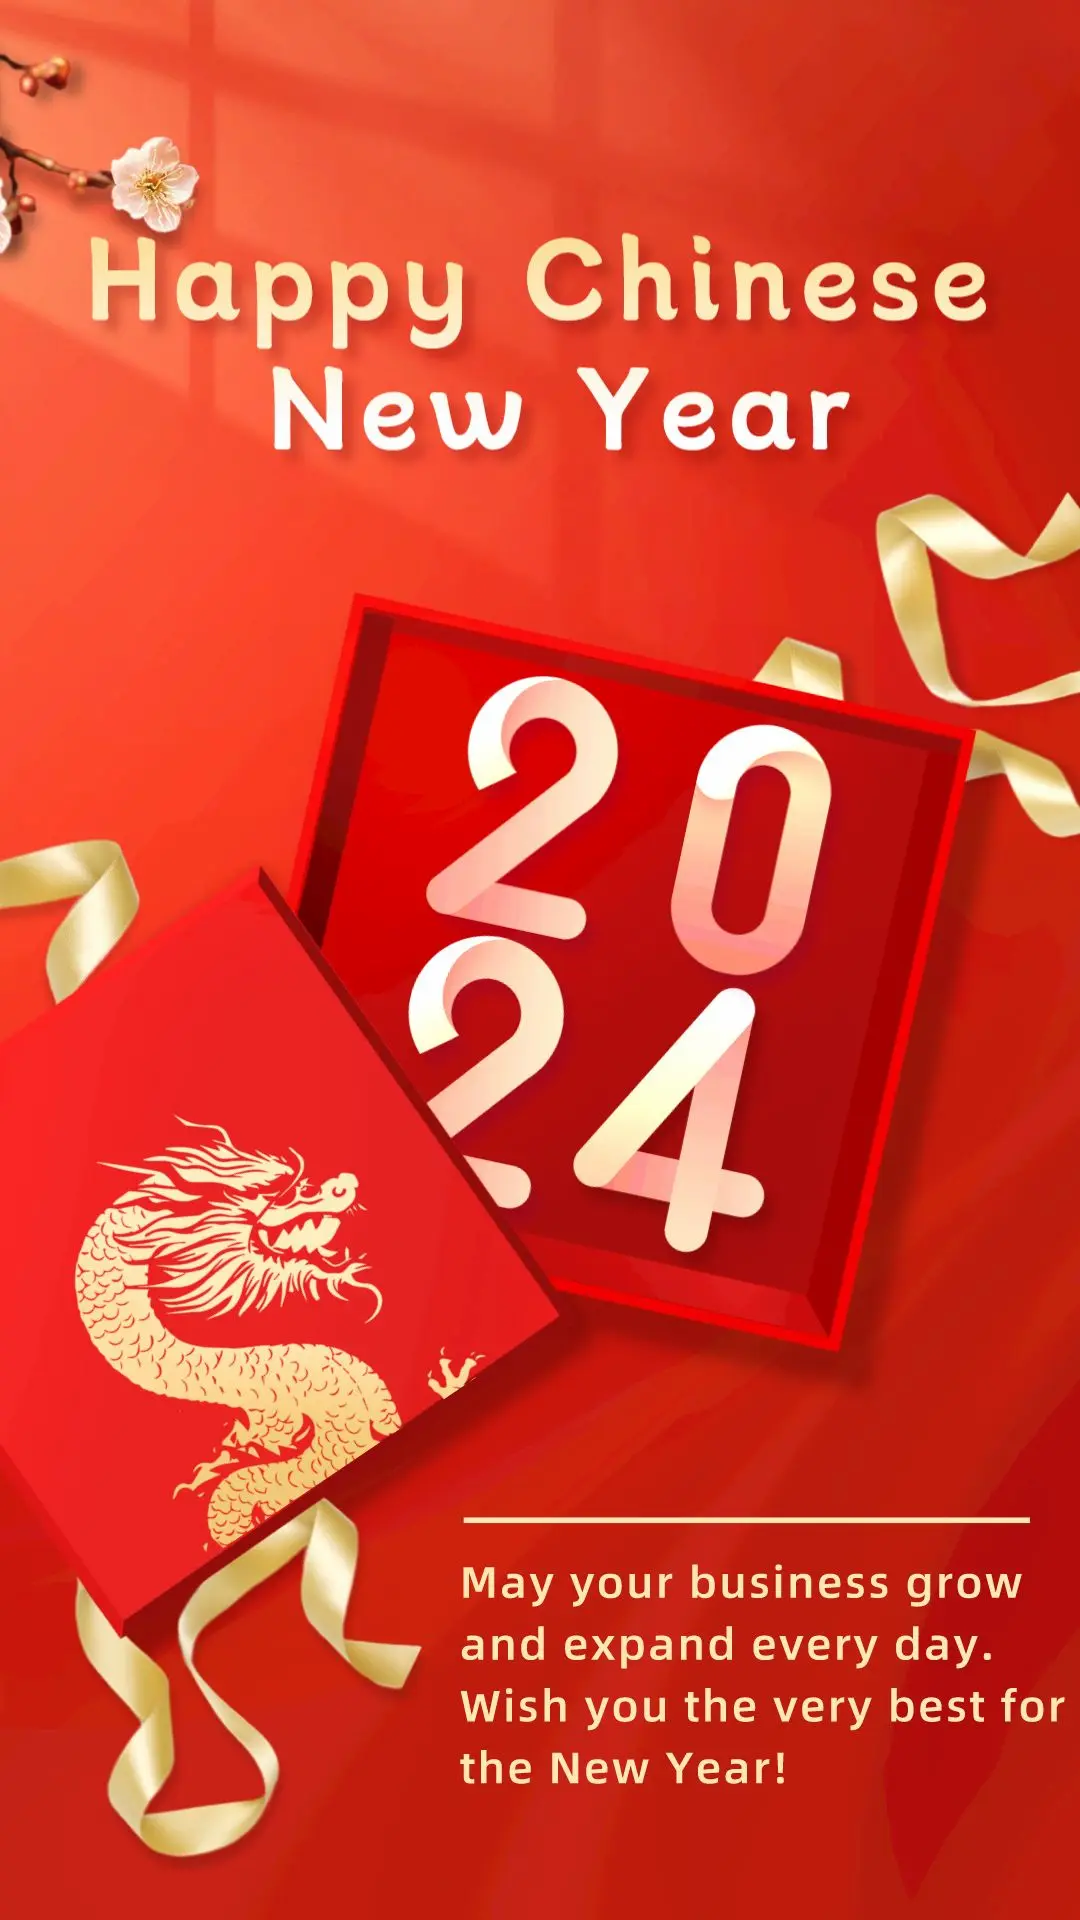 welcomes the Chinese New Year